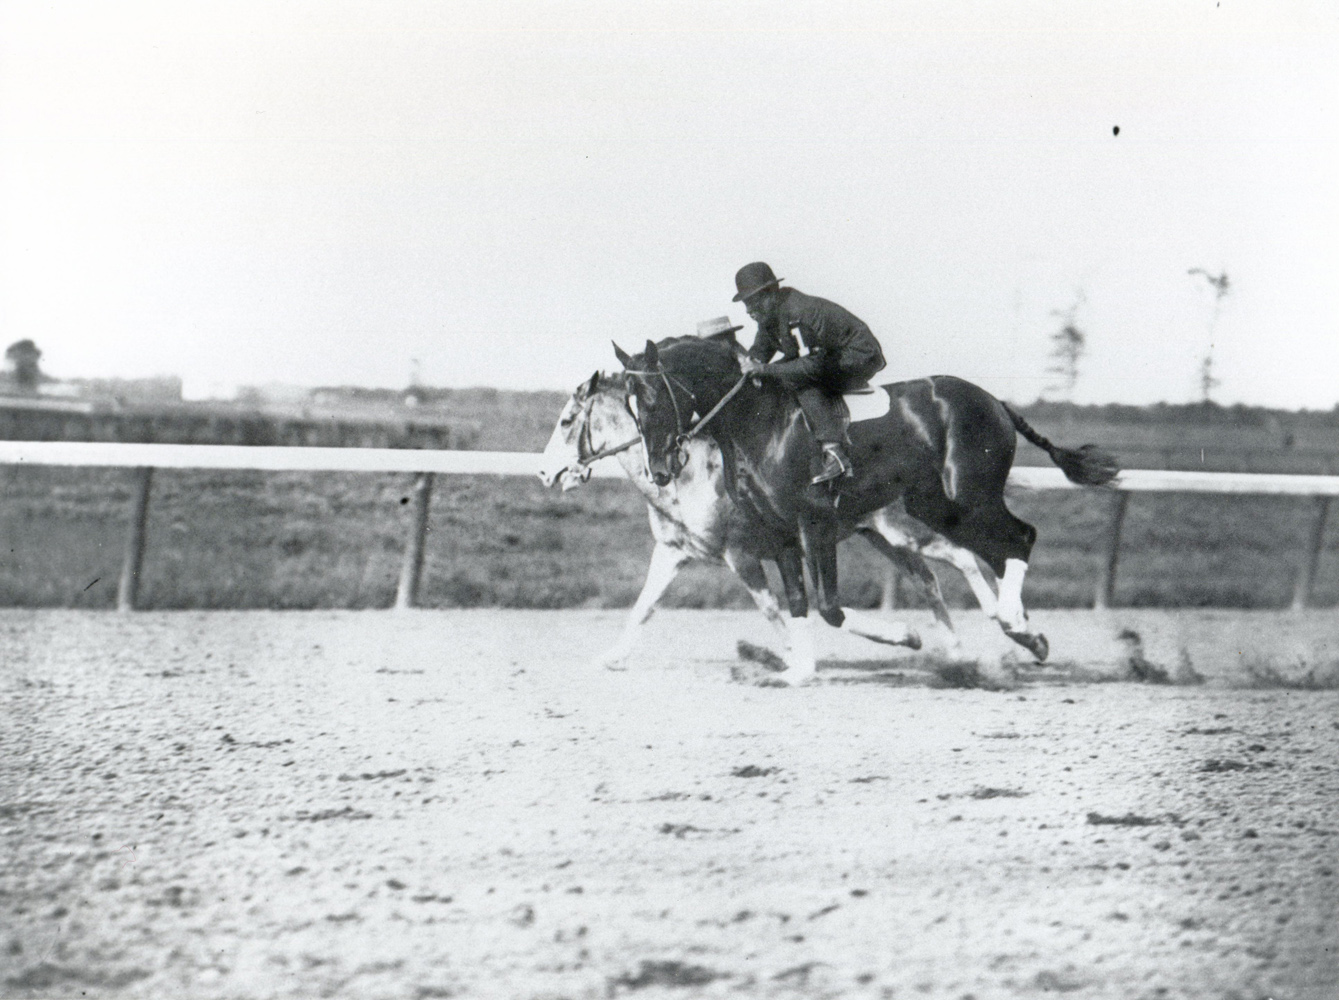 Colin warming up on the track with Marshall Lilly up (Keeneland Library Cook Collection/Museum Collection)